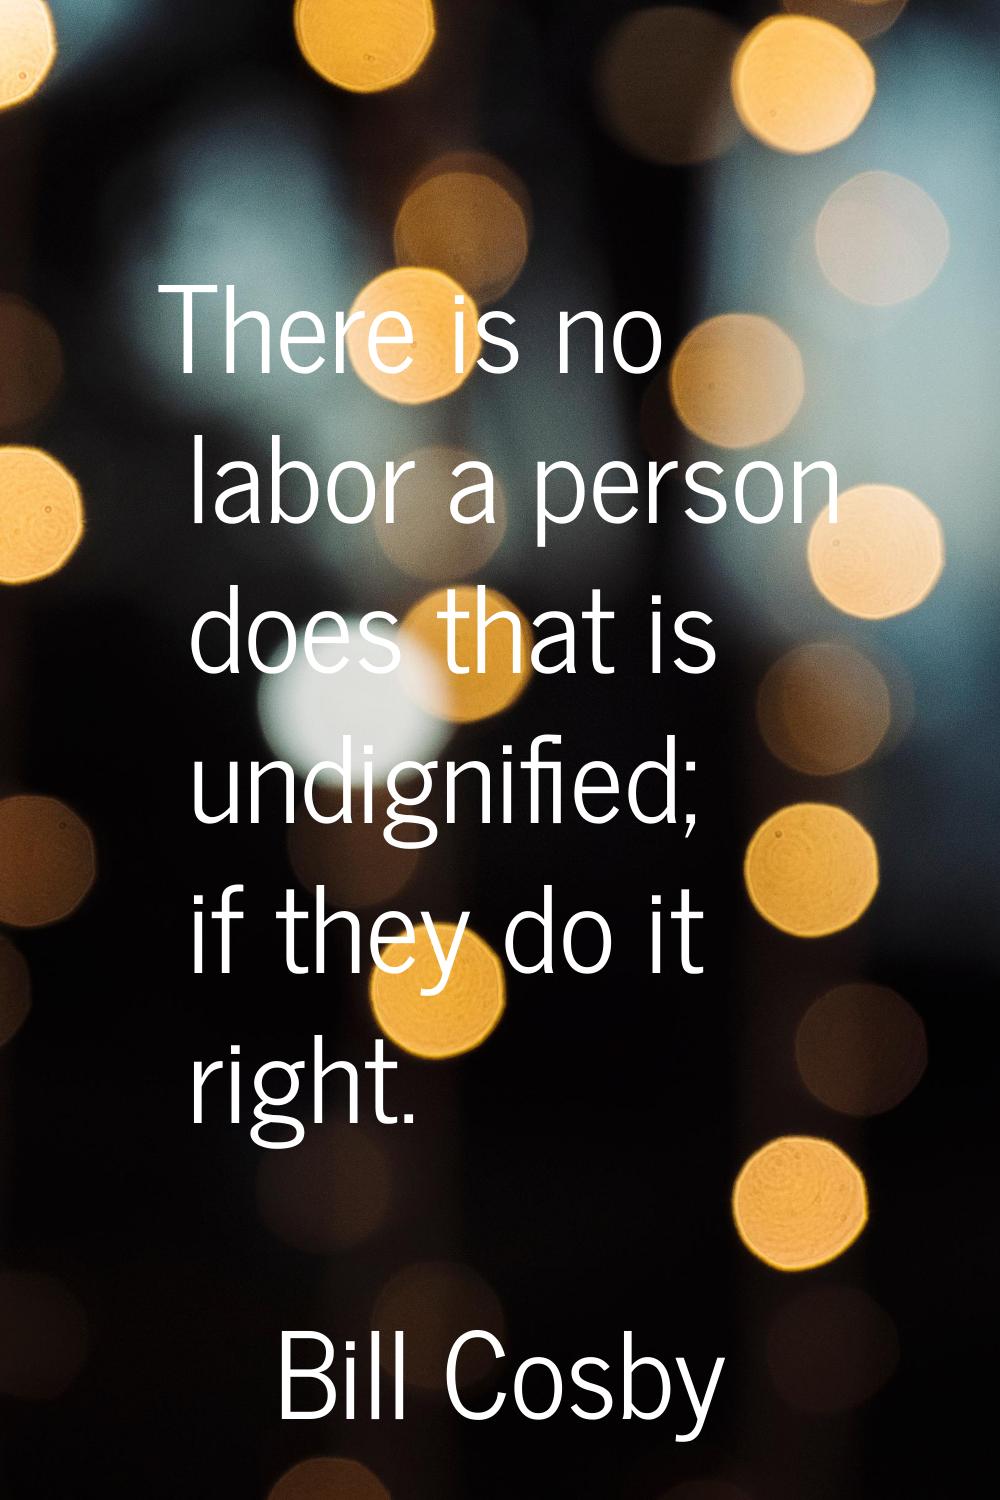 There is no labor a person does that is undignified; if they do it right.